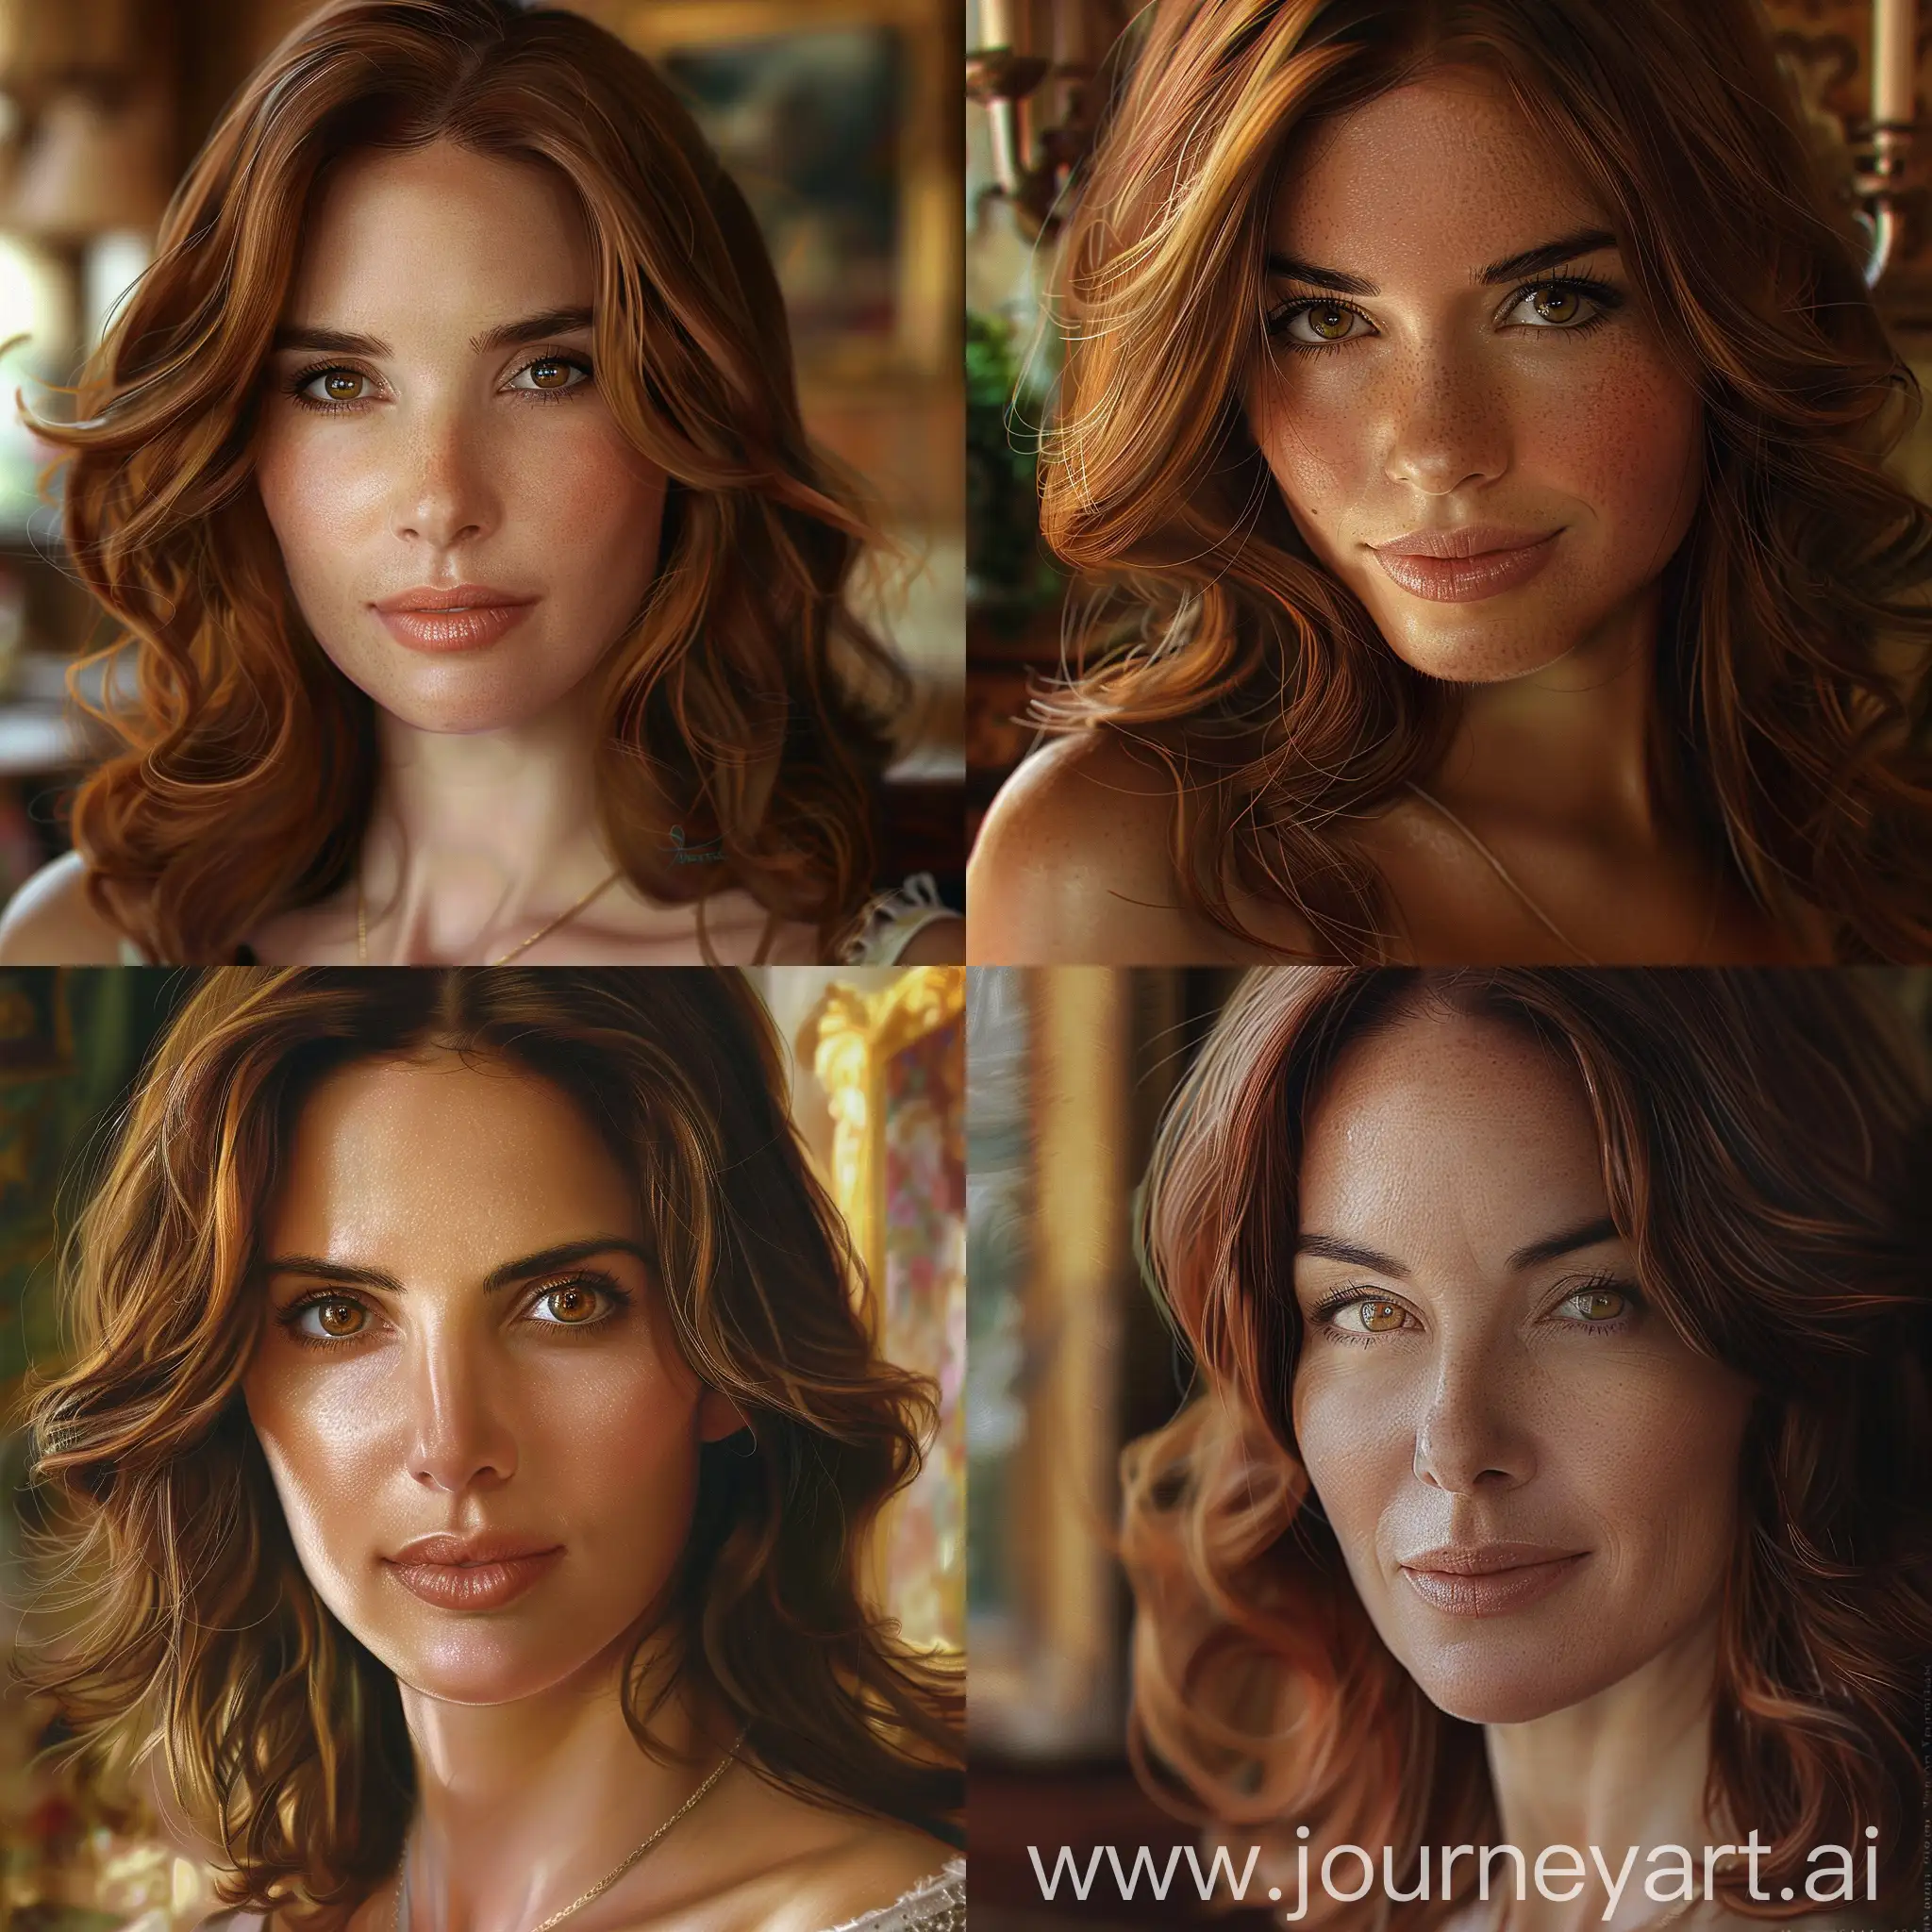 Ultra-realistic close-up portrait of a 35-year-old Spanish woman, her demeanor radiating warmth and sophistication. Her hair, a rich chestnut brown, is styled in soft waves that frame her face, highlighting her olive complexion. Her eyes, a deep hazel, are expressive and filled with intelligence, accented by minimal, elegant makeup that enhances her natural beauty. She wears a simple, yet elegant, necklace that subtly complements her attire, suggesting a refined sense of style. The background is intentionally blurred, focusing attention on her, yet hints at a tastefully decorated interior, suggesting a life lived with intention and grace. The lighting is soft and warm, casting her features in a glow that accentuates her striking yet approachable beauty. This portrait captures not just her physical appearance but the essence of her character, offering a glimpse into the soul of a woman who embodies strength, elegance, and the rich cultural tapestry of Spain.